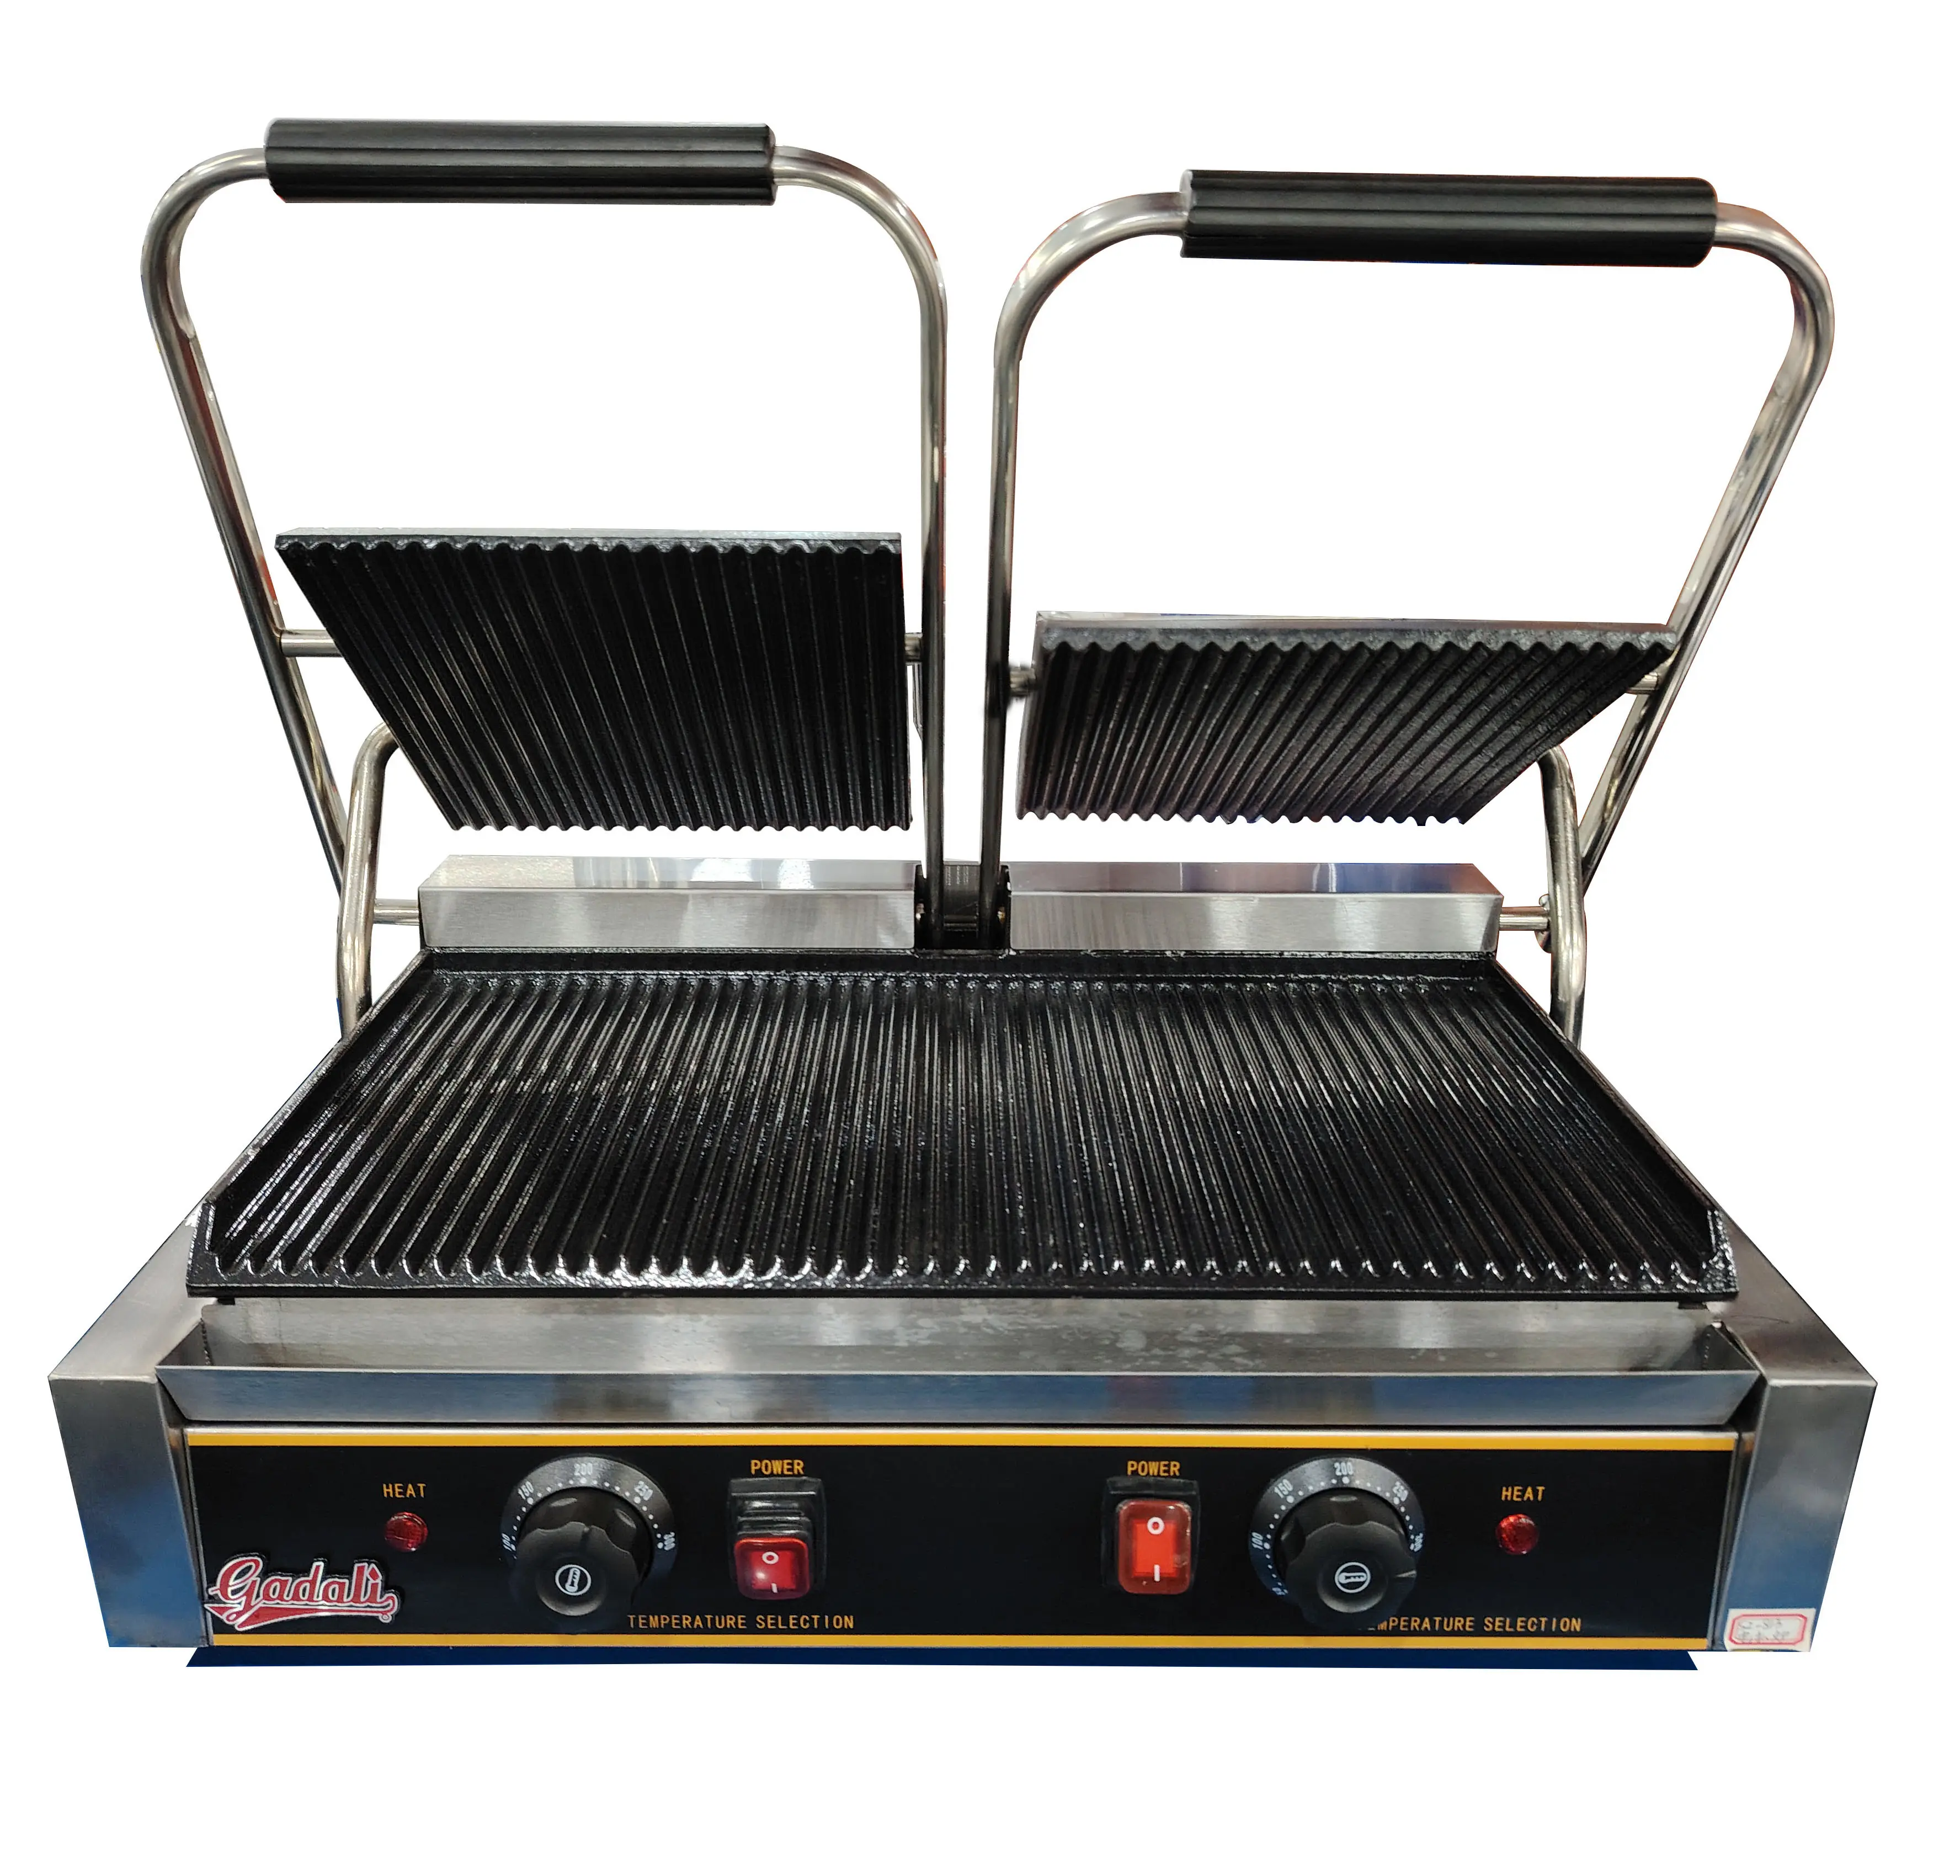 Professional best price stainless steel korean bbq grill images/outdoor kitchen gas bbq grill